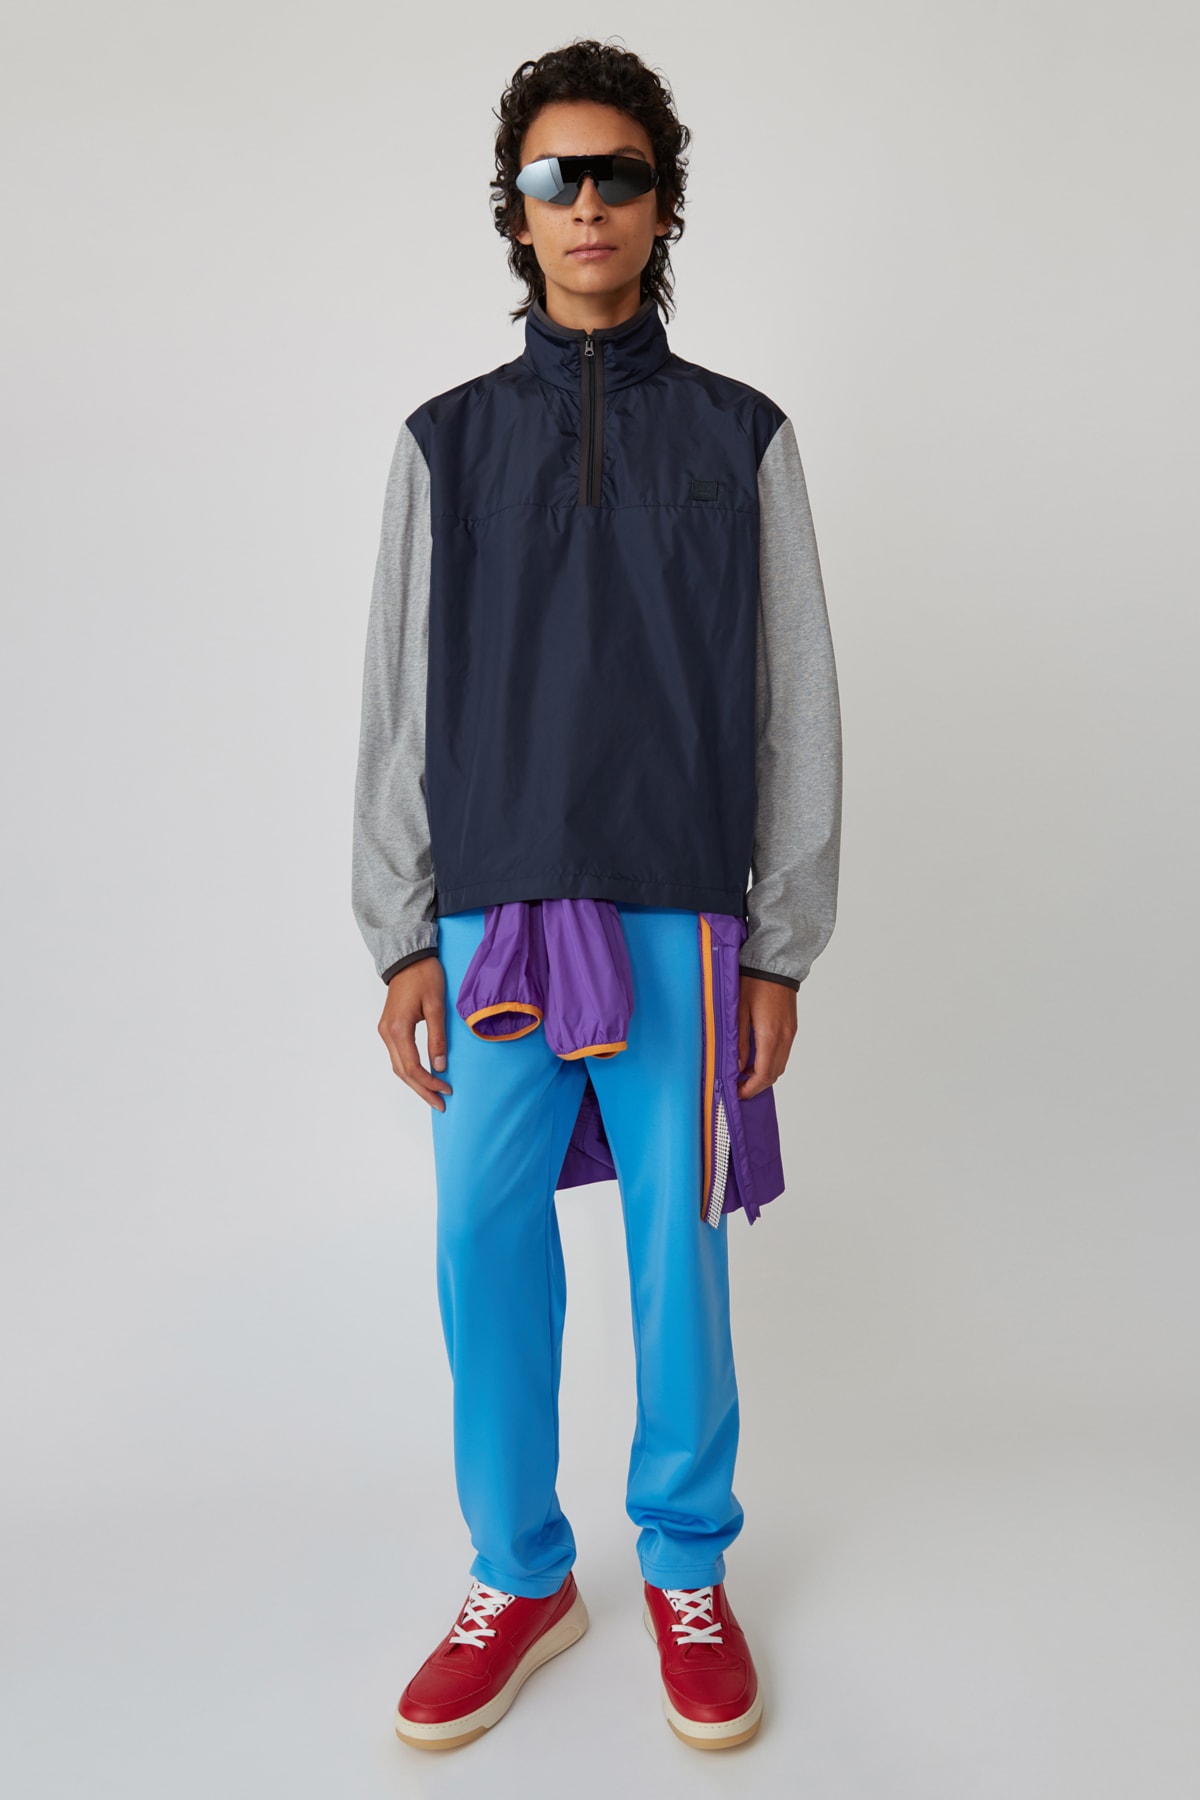 Acne Studios Spring/Summer 2019 Face Collection Hooded Sweatshirt Navy Pants Blue